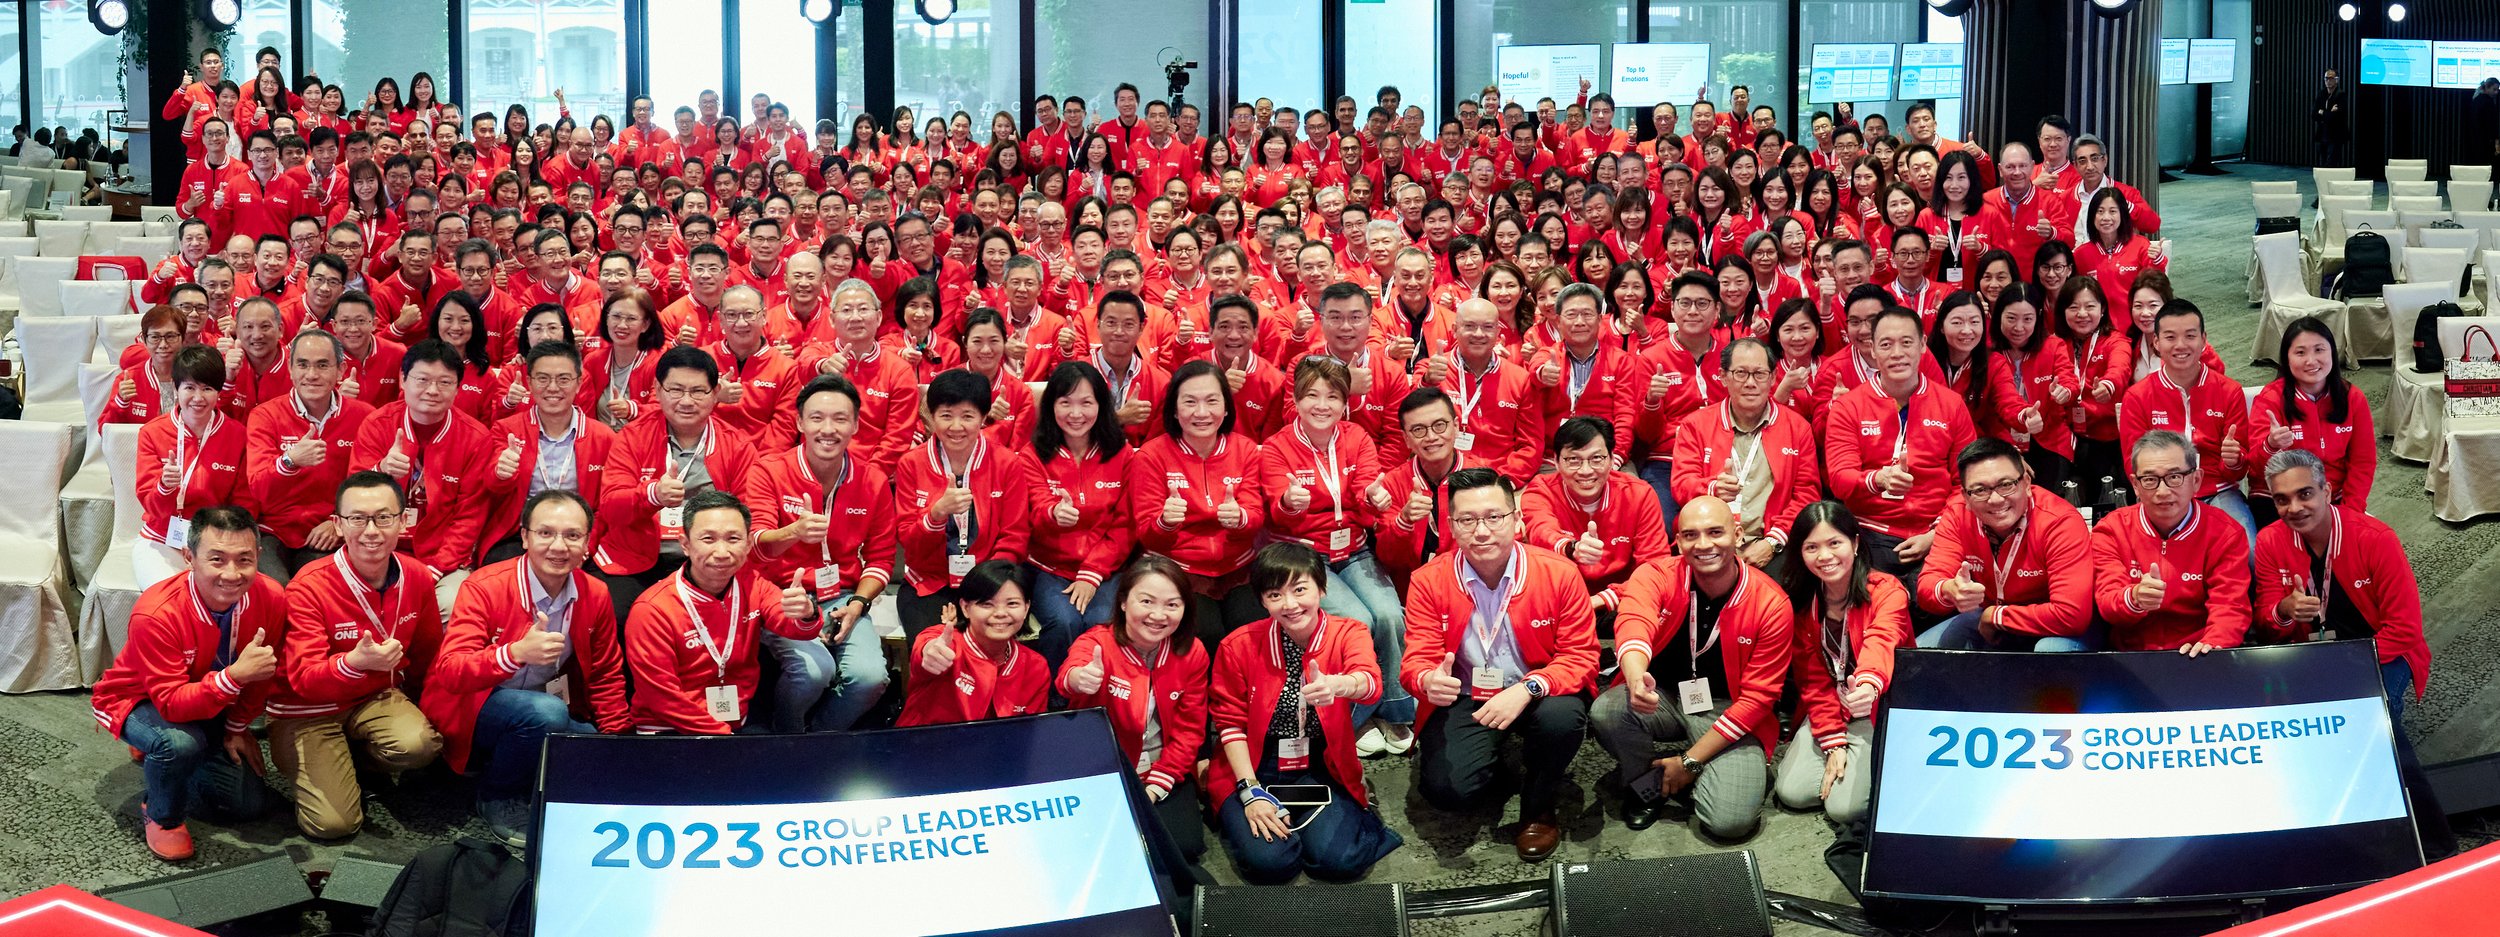 [OCBC] Guiding the Future: How OCBC Revitalised  its Purpose, Values and Ambition  for Another 100 Years of Leadership